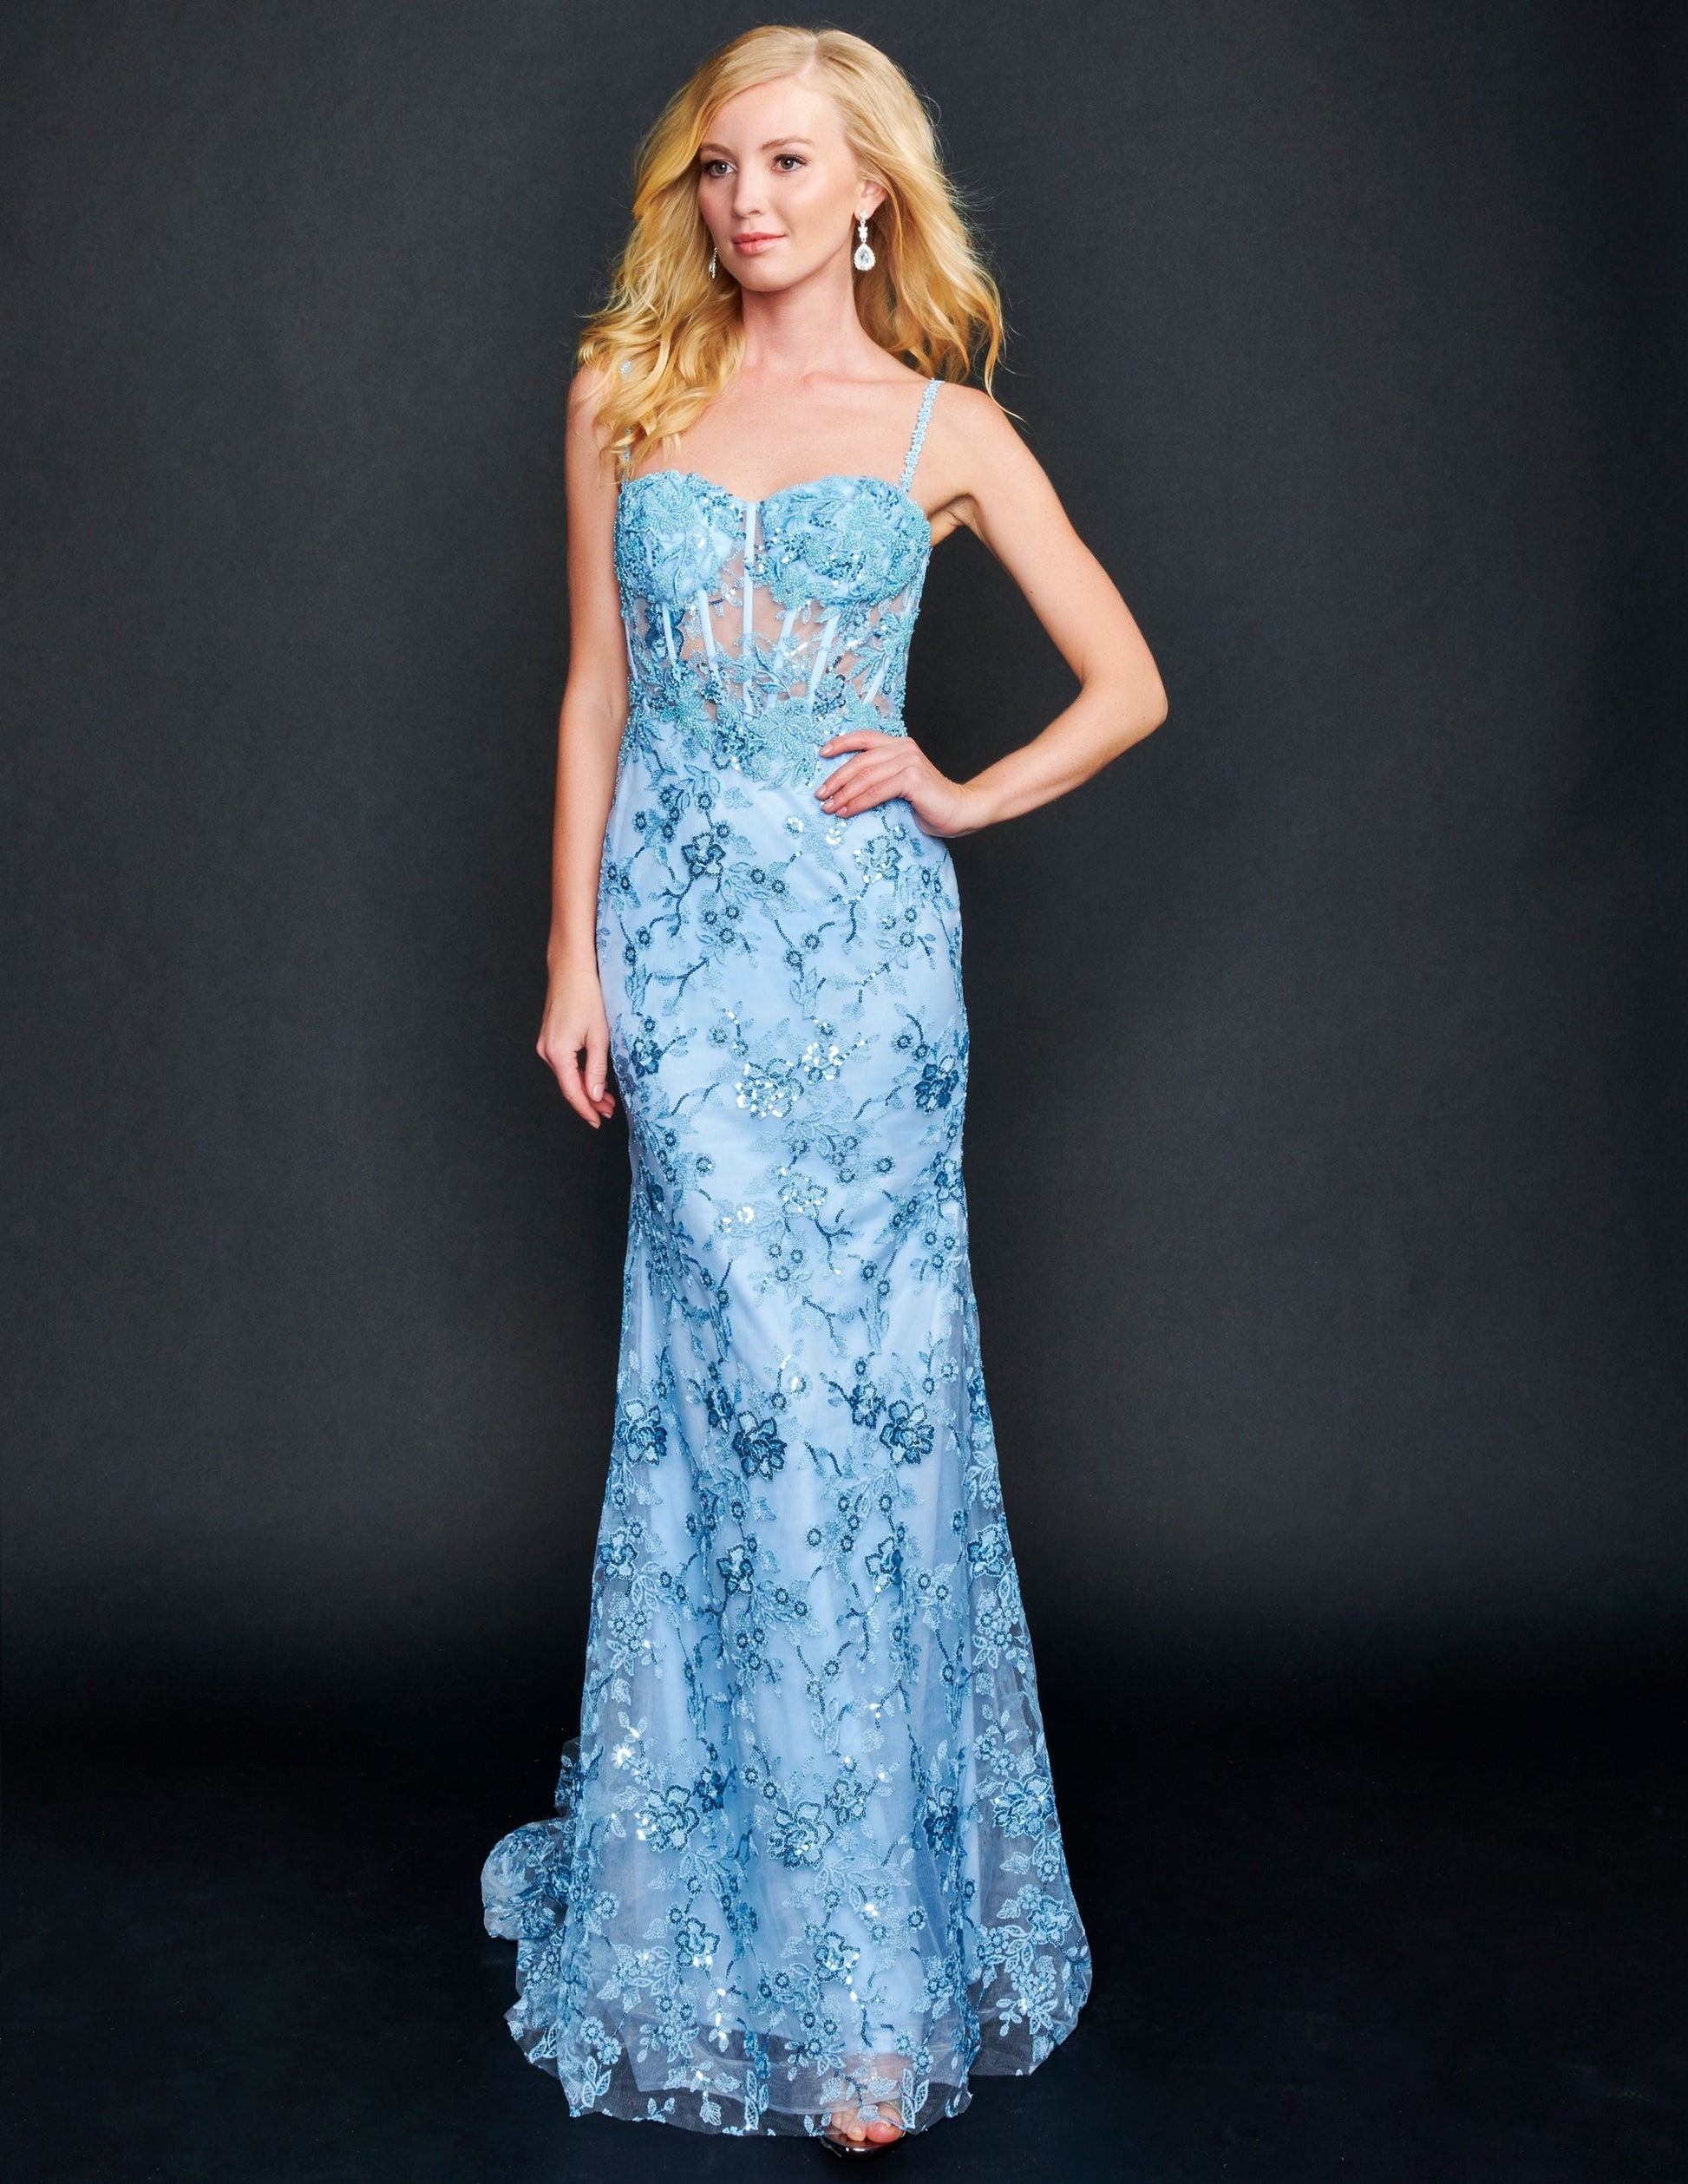 Nina Canacci 6556 Long sheer lace corset fitted bodice with a mermaid skirt and train. Embellished Prom Pageant Gown  Available Size-0-12  Available Color- Ivory, Baby Blue, Raspberry (Mauve)